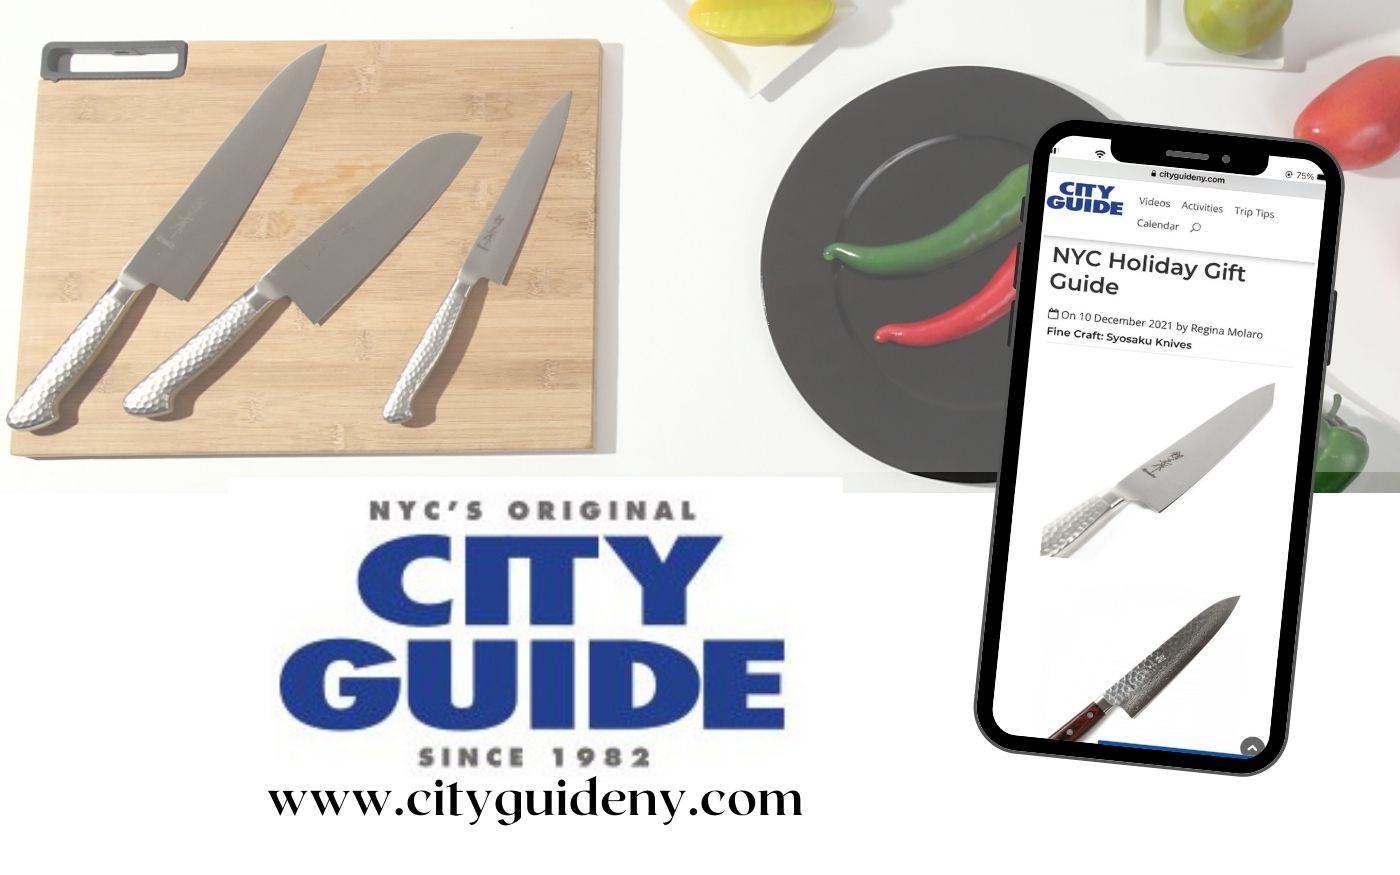 Syosaku-Japan was Featured in City Guide